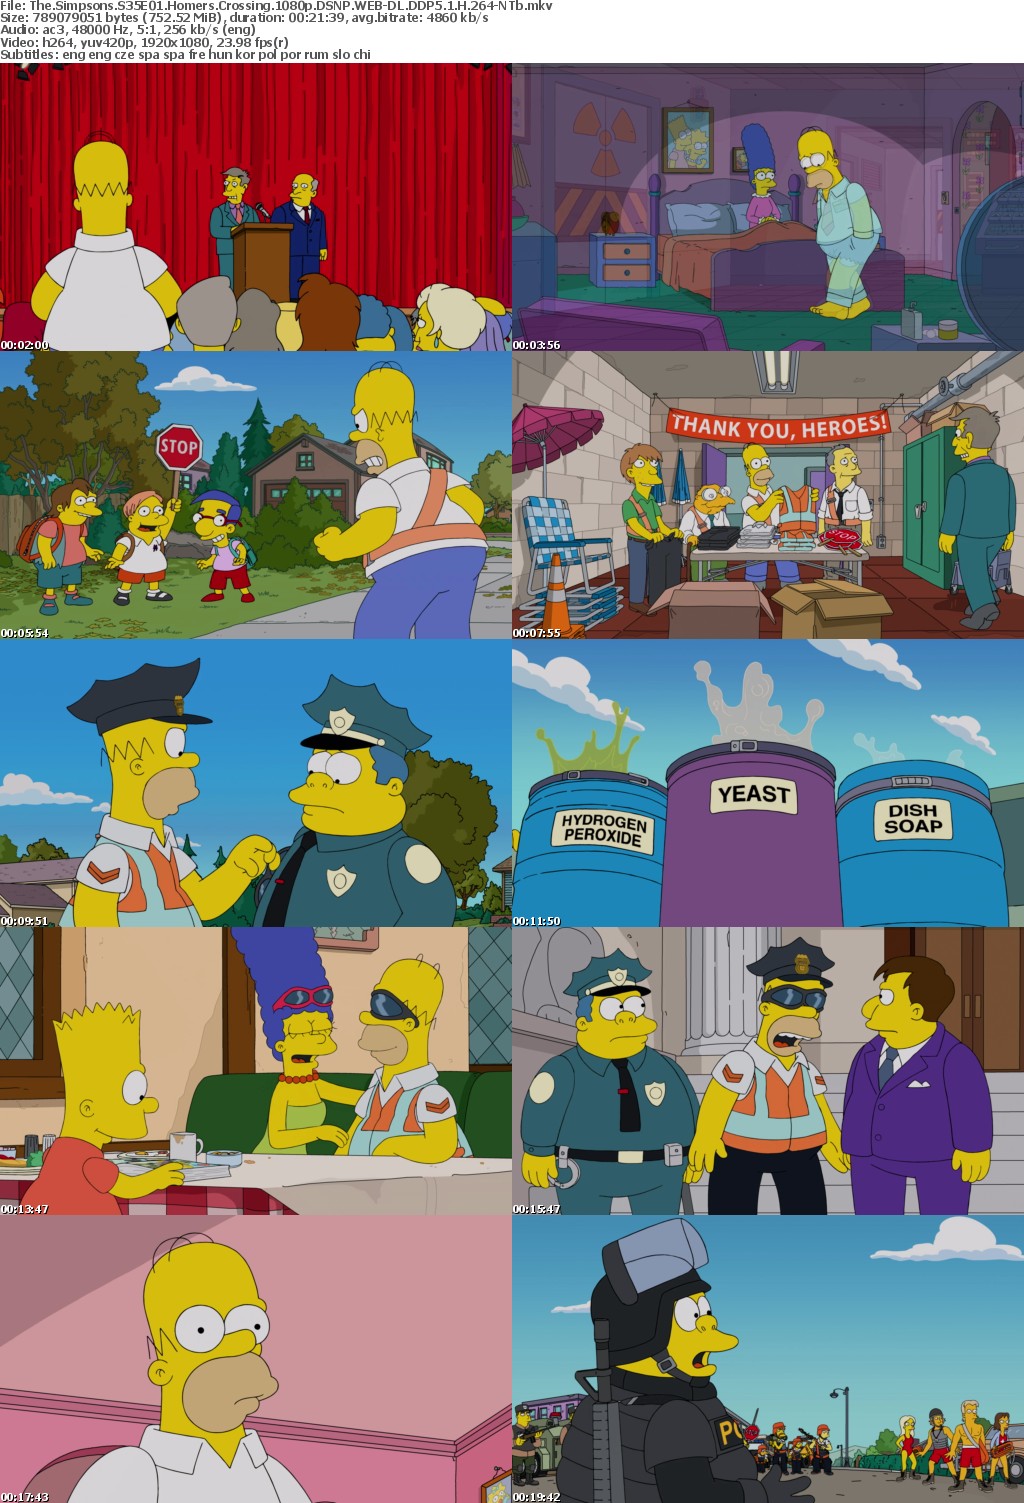 The Simpsons S35E01 Homers Crossing 1080p DSNP WEB-DL DDP5 1 H 264-NTb